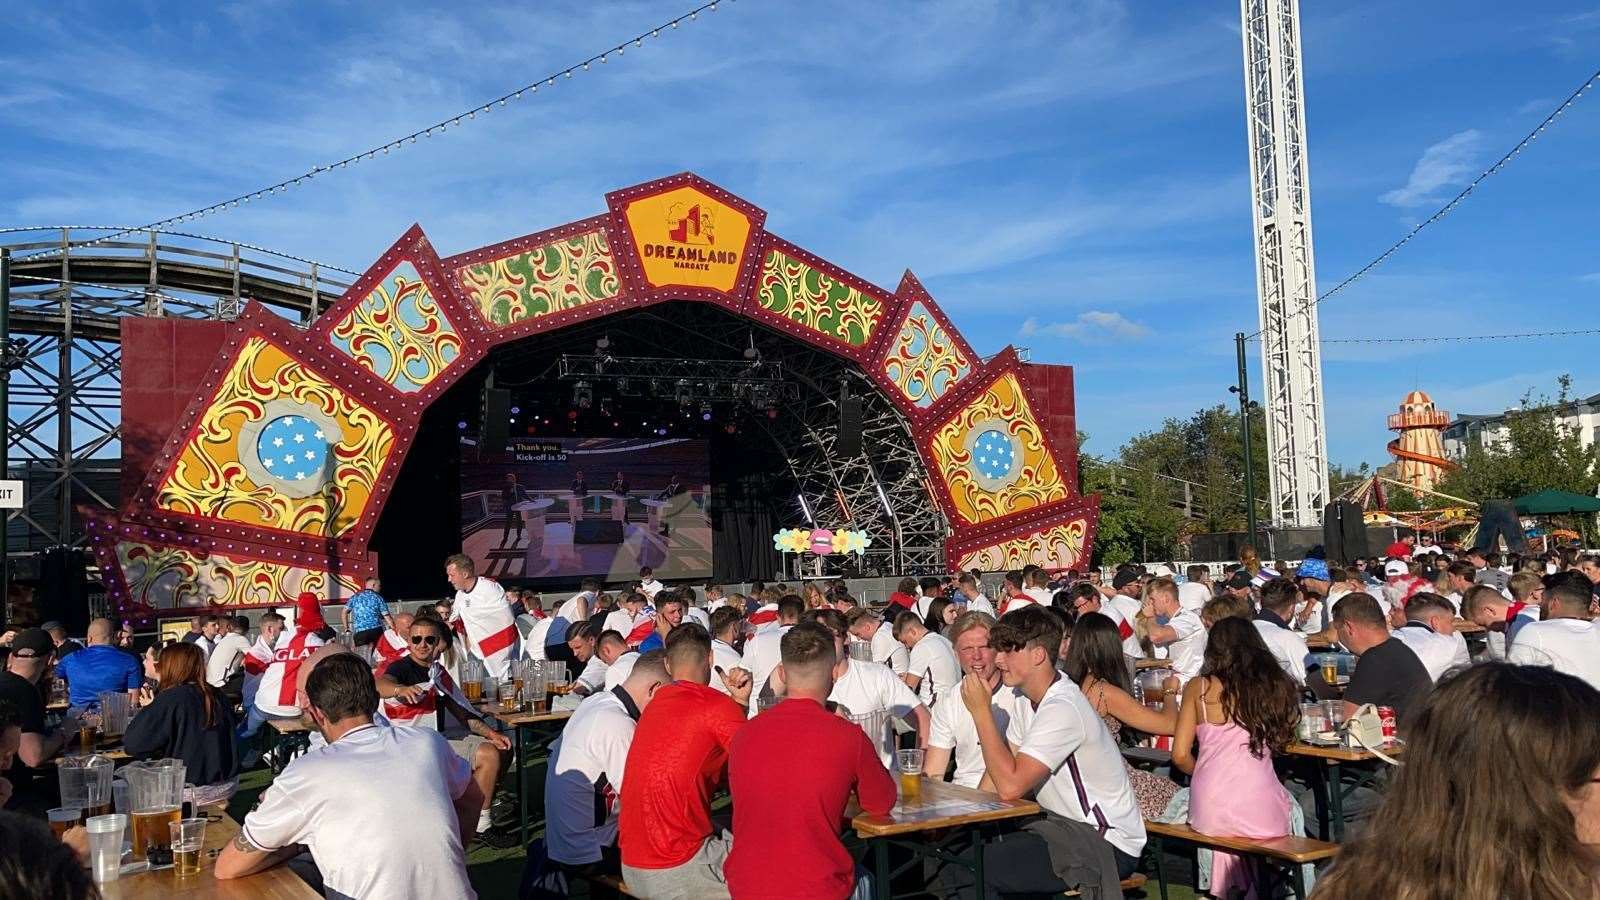 Fans watching England vs Denmark in the Euros 2020 at Dreamland yesterday evening